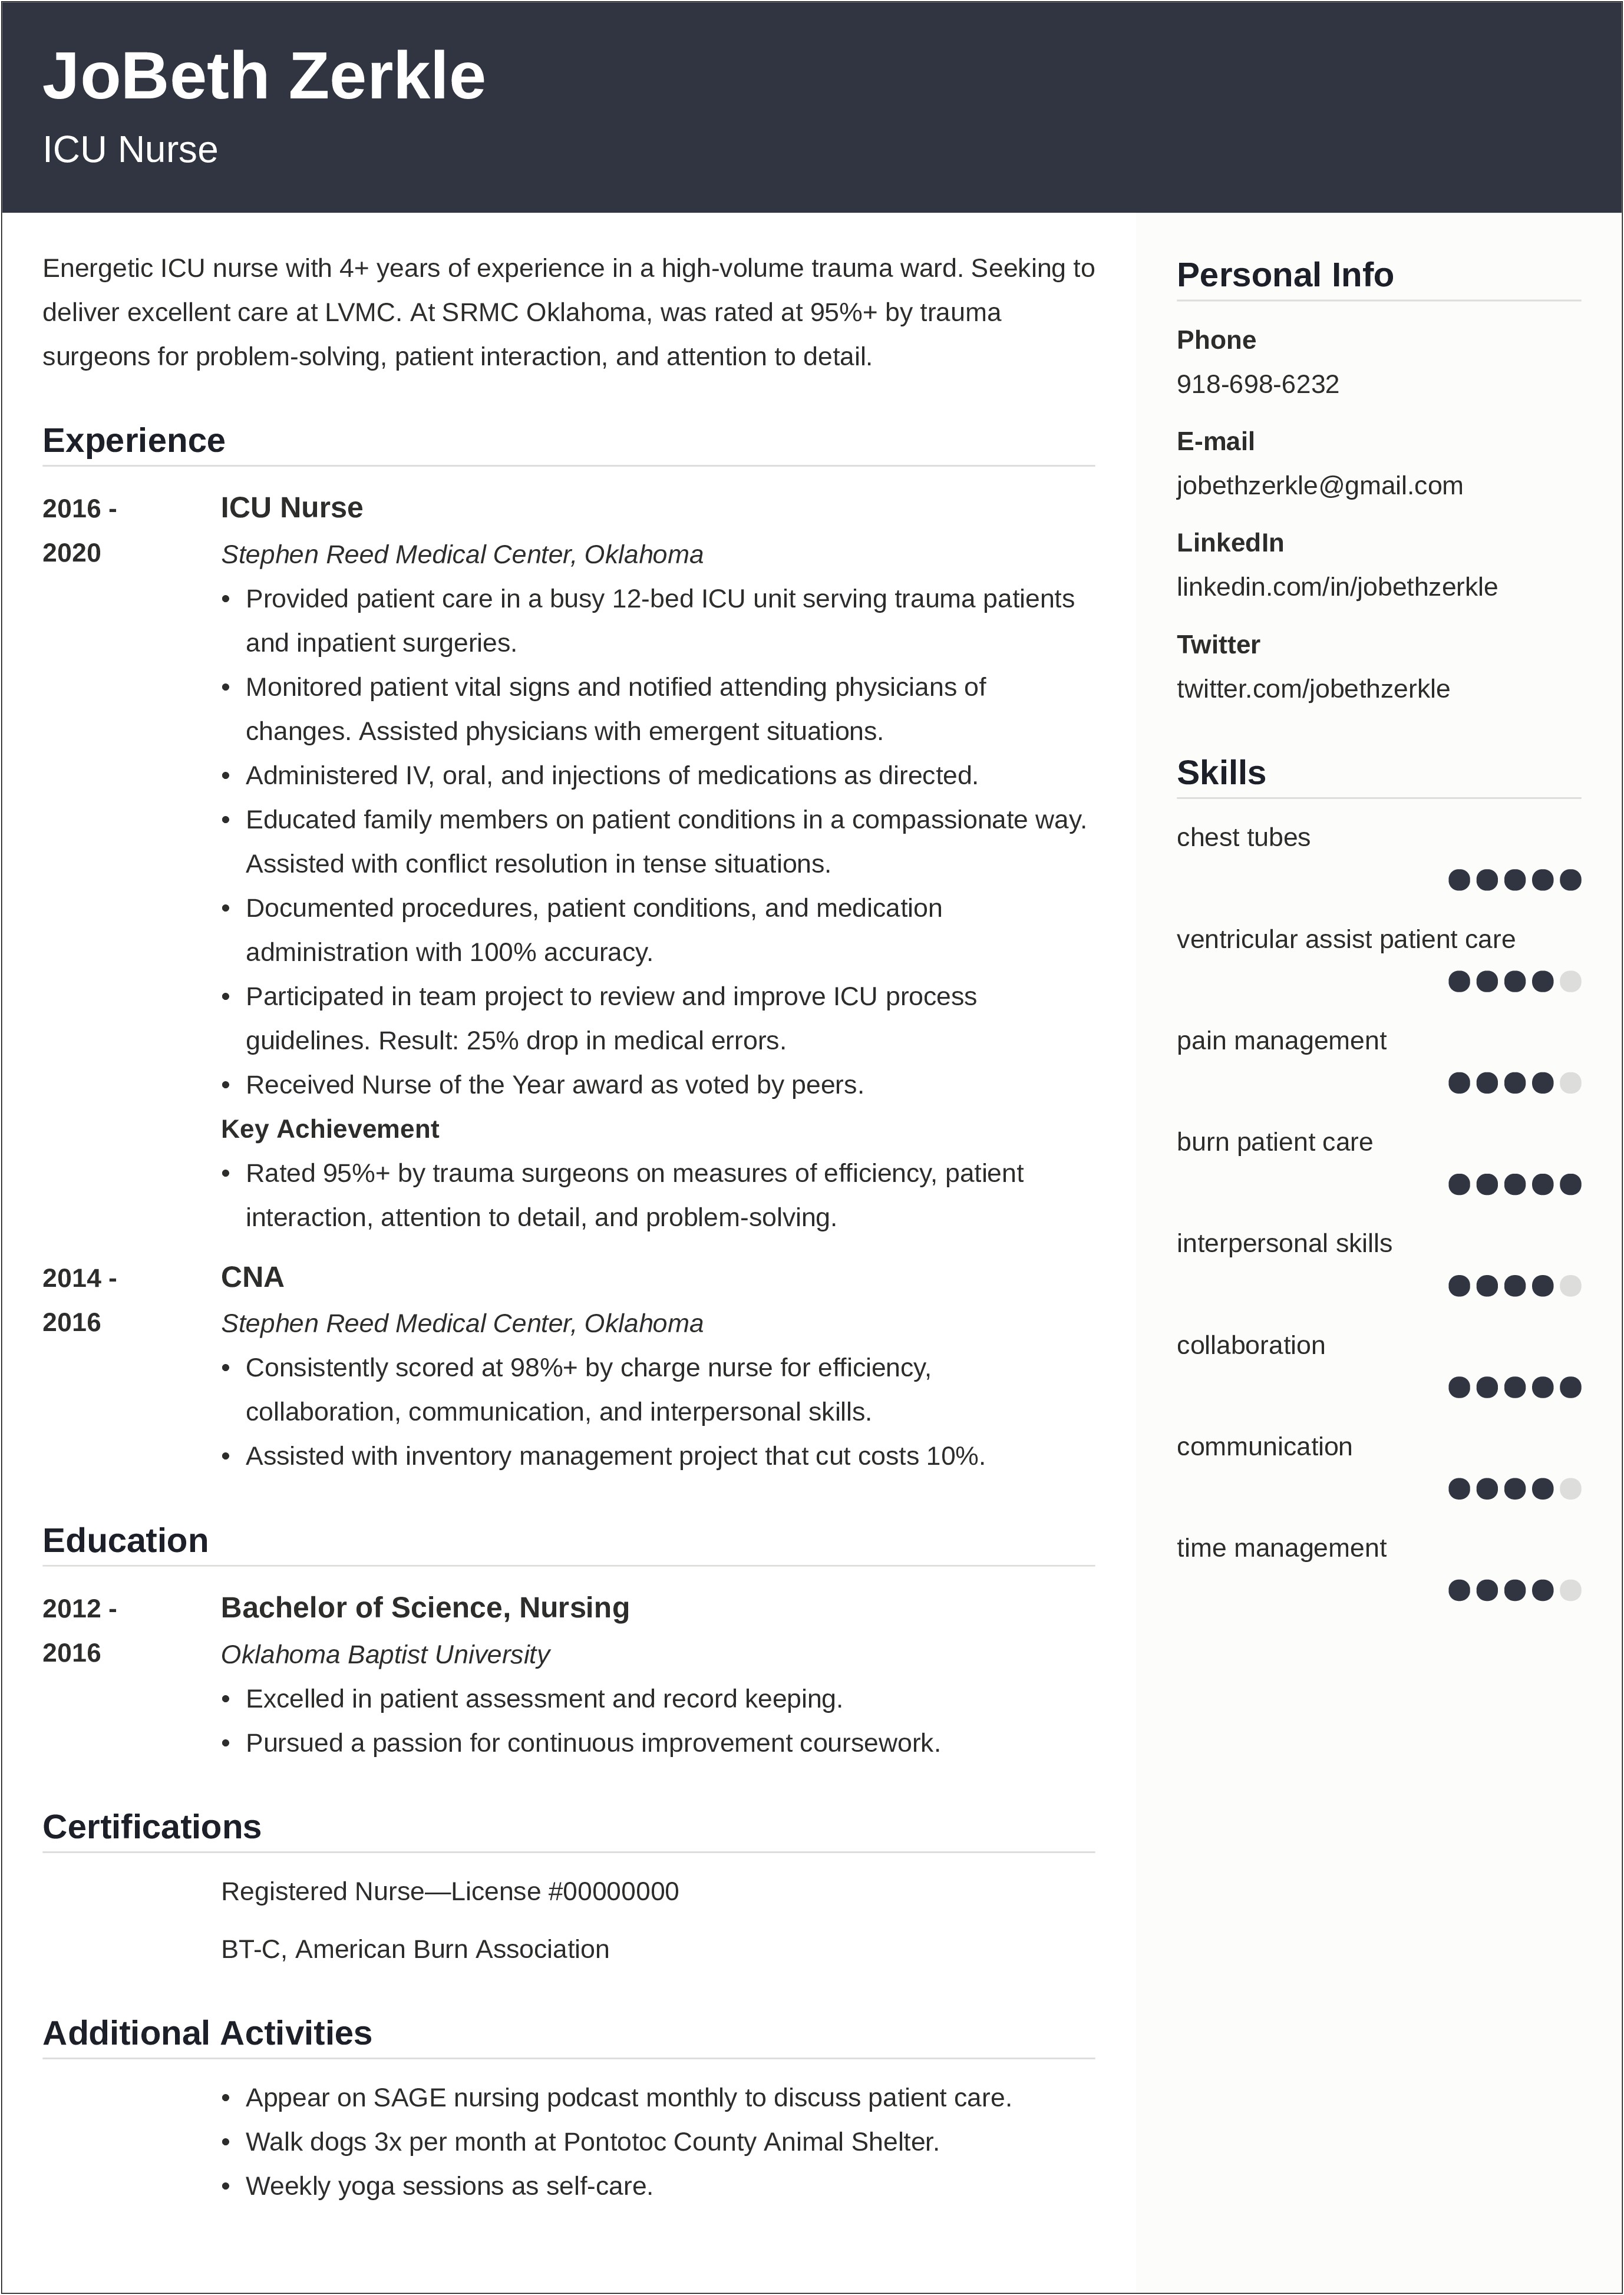 Nurse Resume Objective Statement For Critical Care